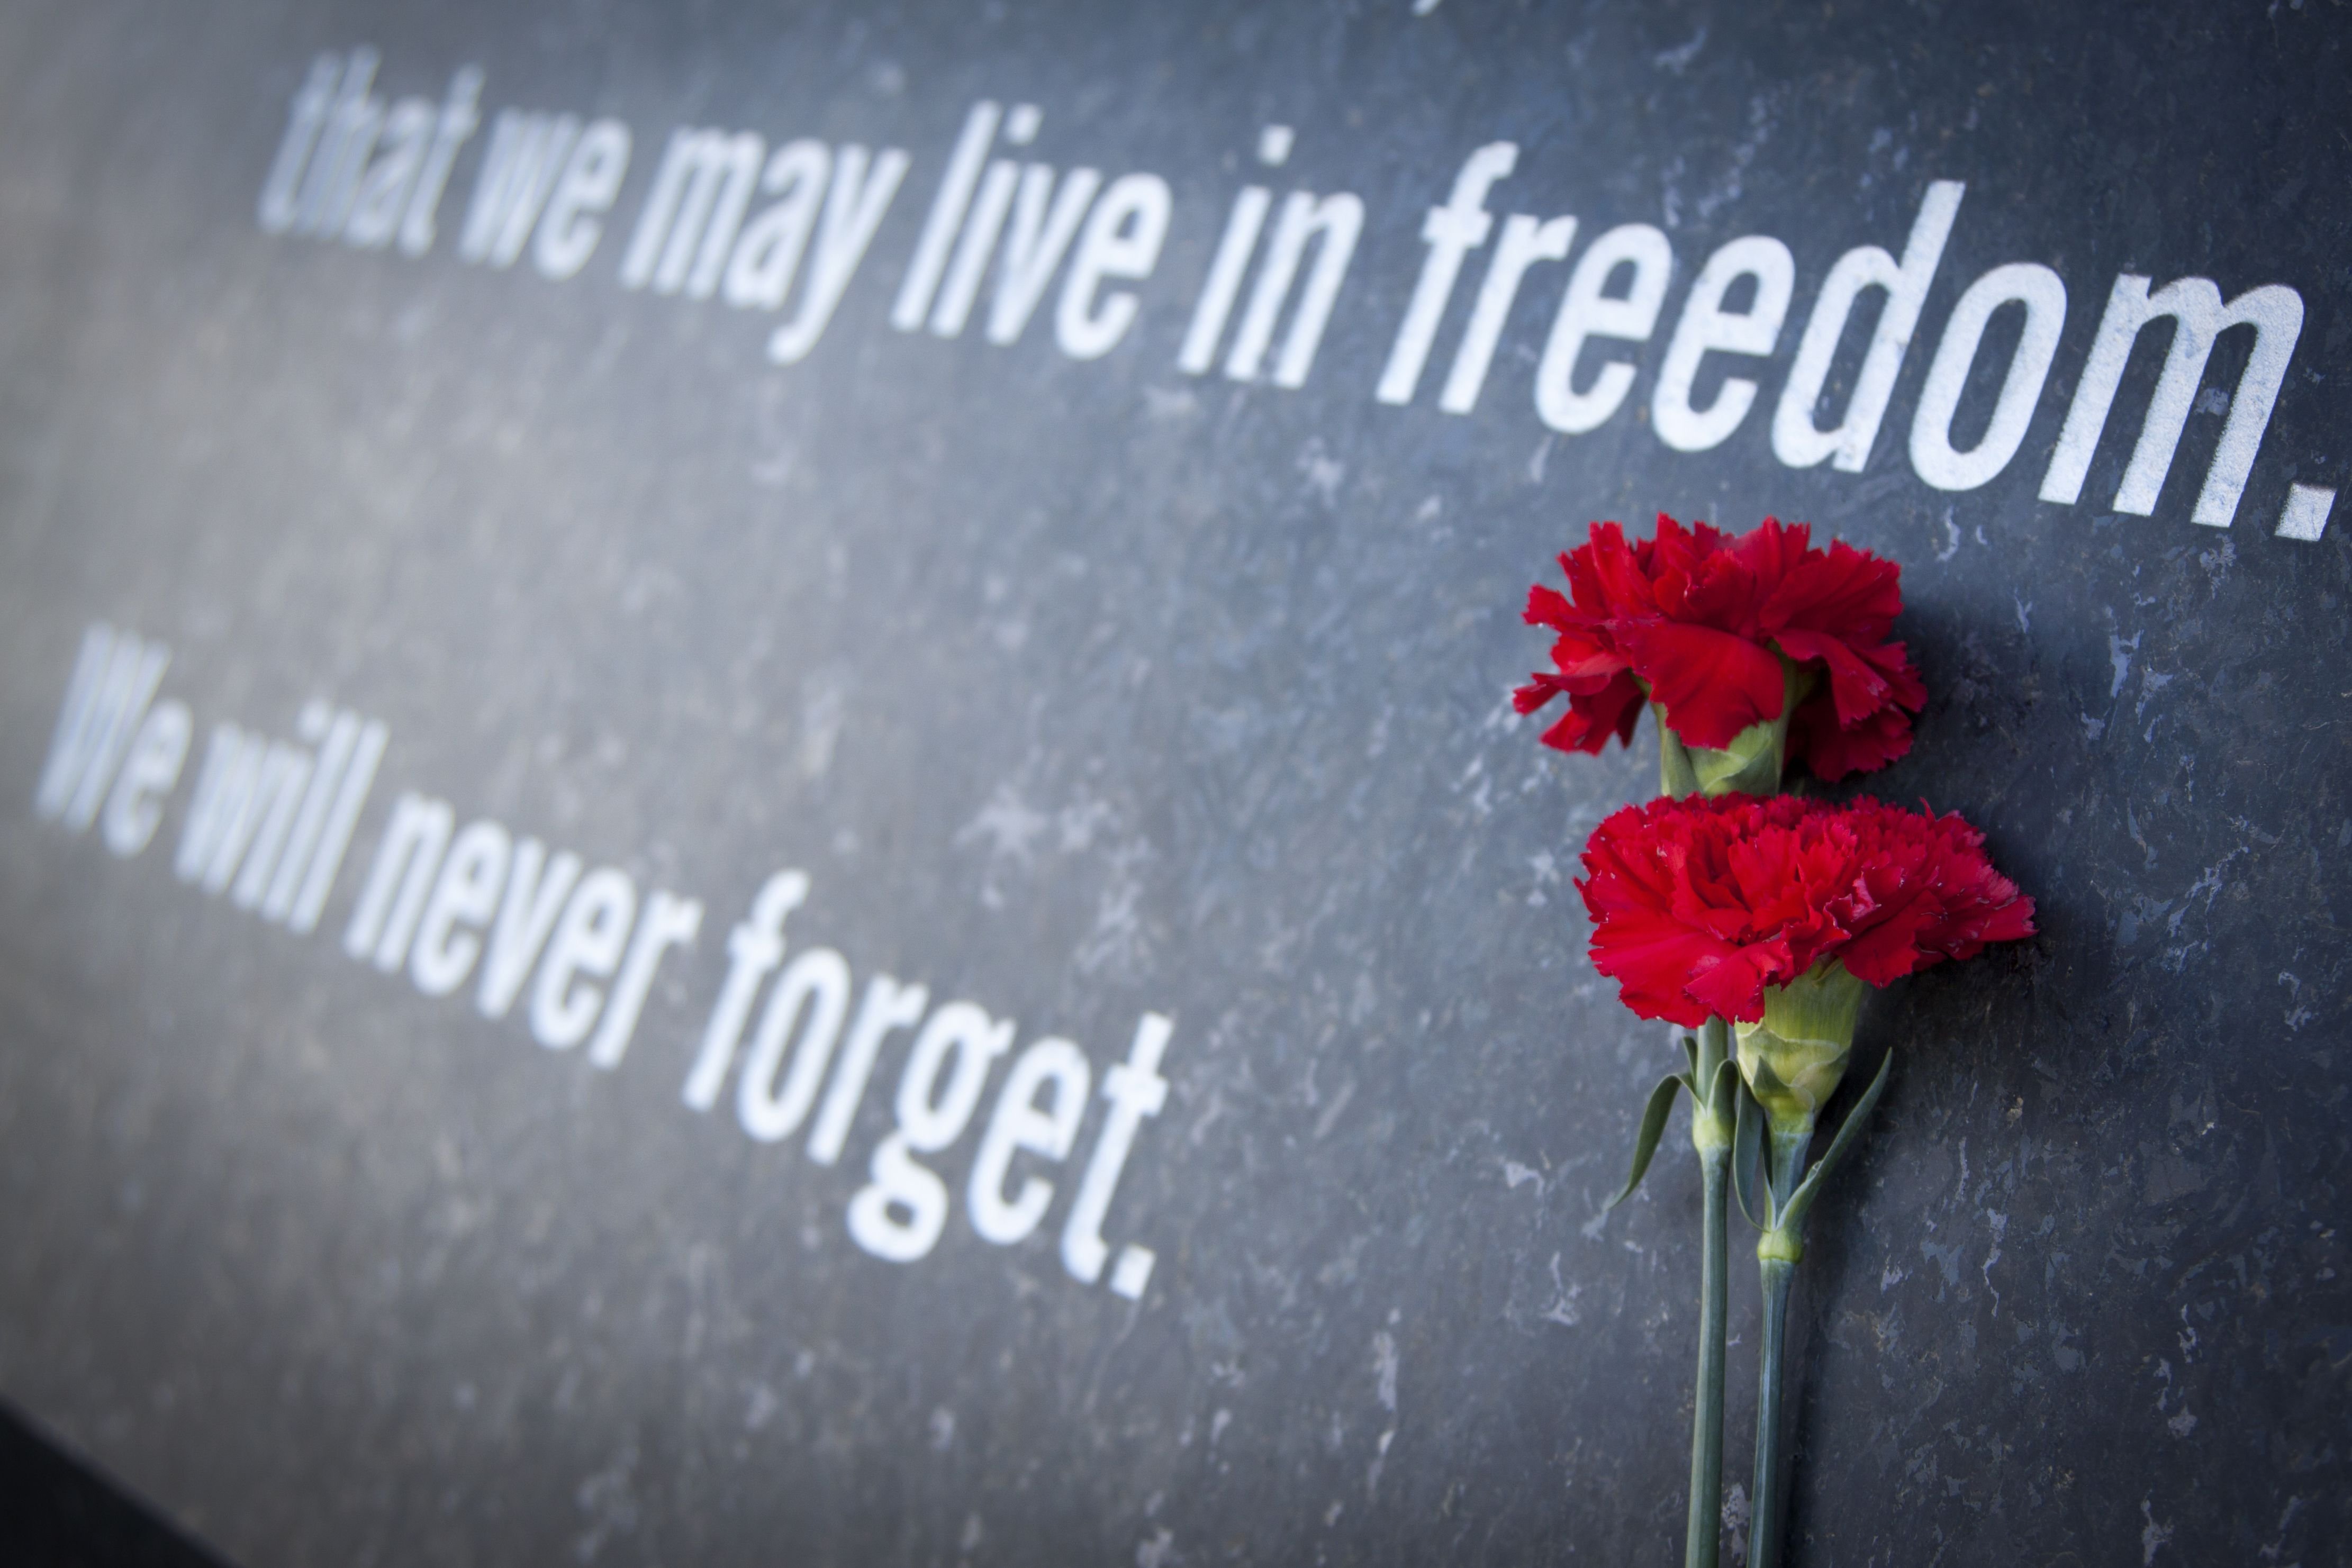 A grave with a red carnation flower. | Source: Shutterstock